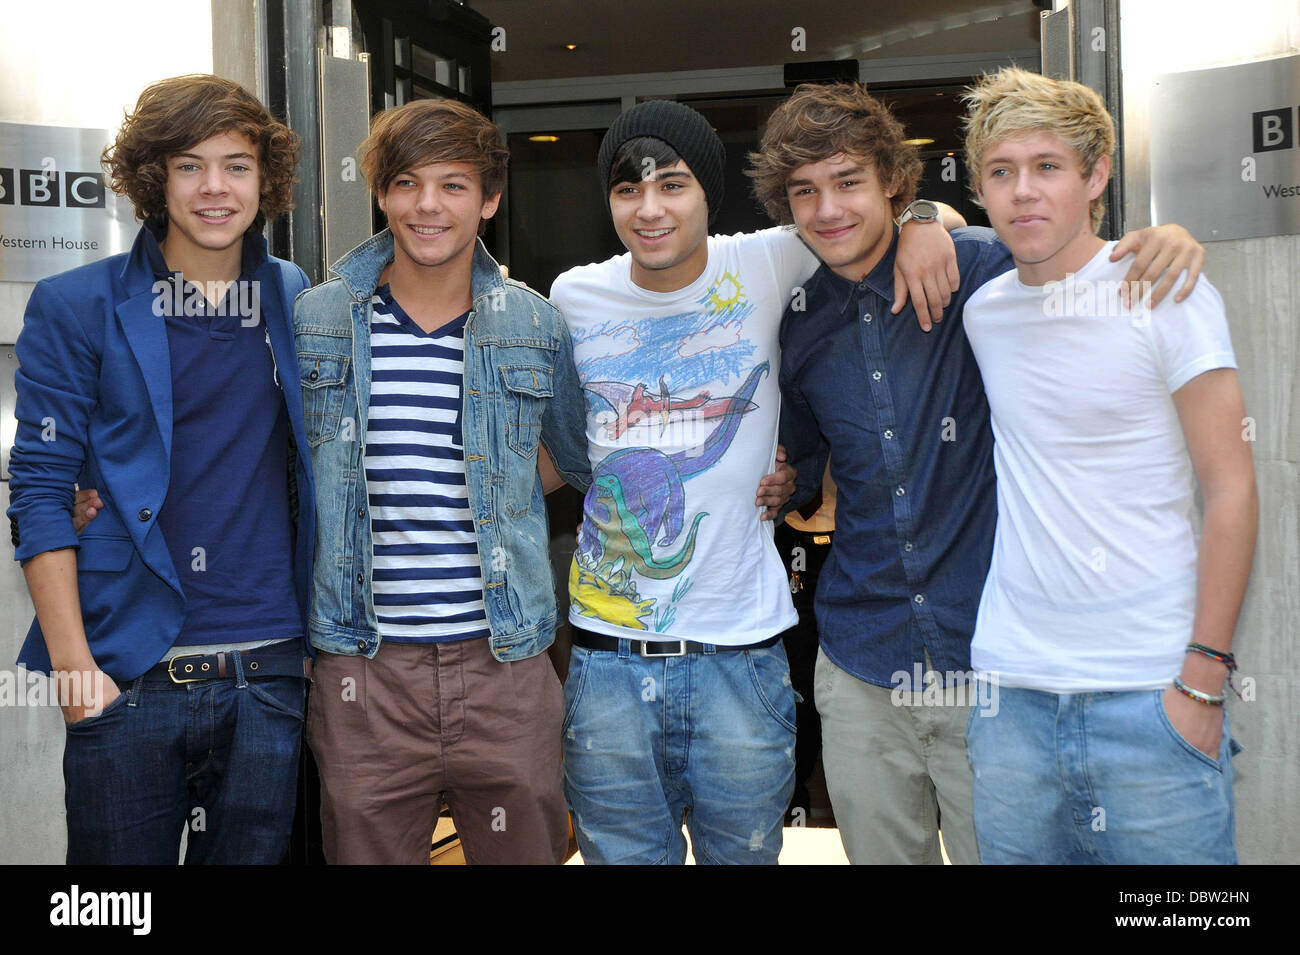 one direction, louis tomlinson and harry styles - image #6085026 on